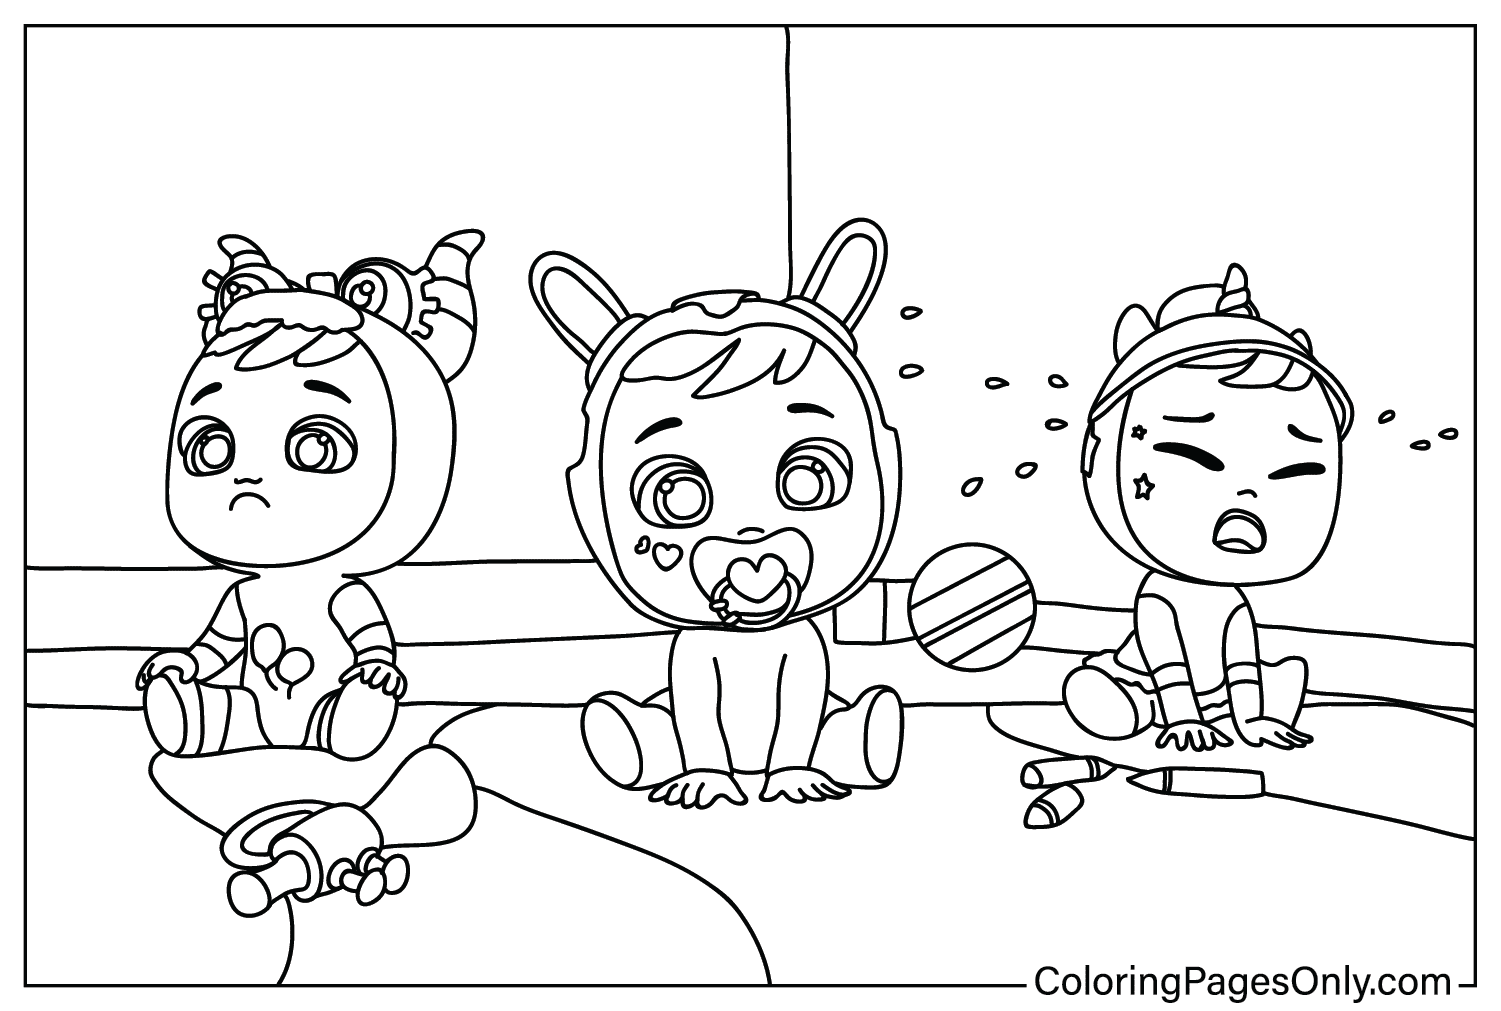 Cry Babies Coloring Page Free from Cry Babies